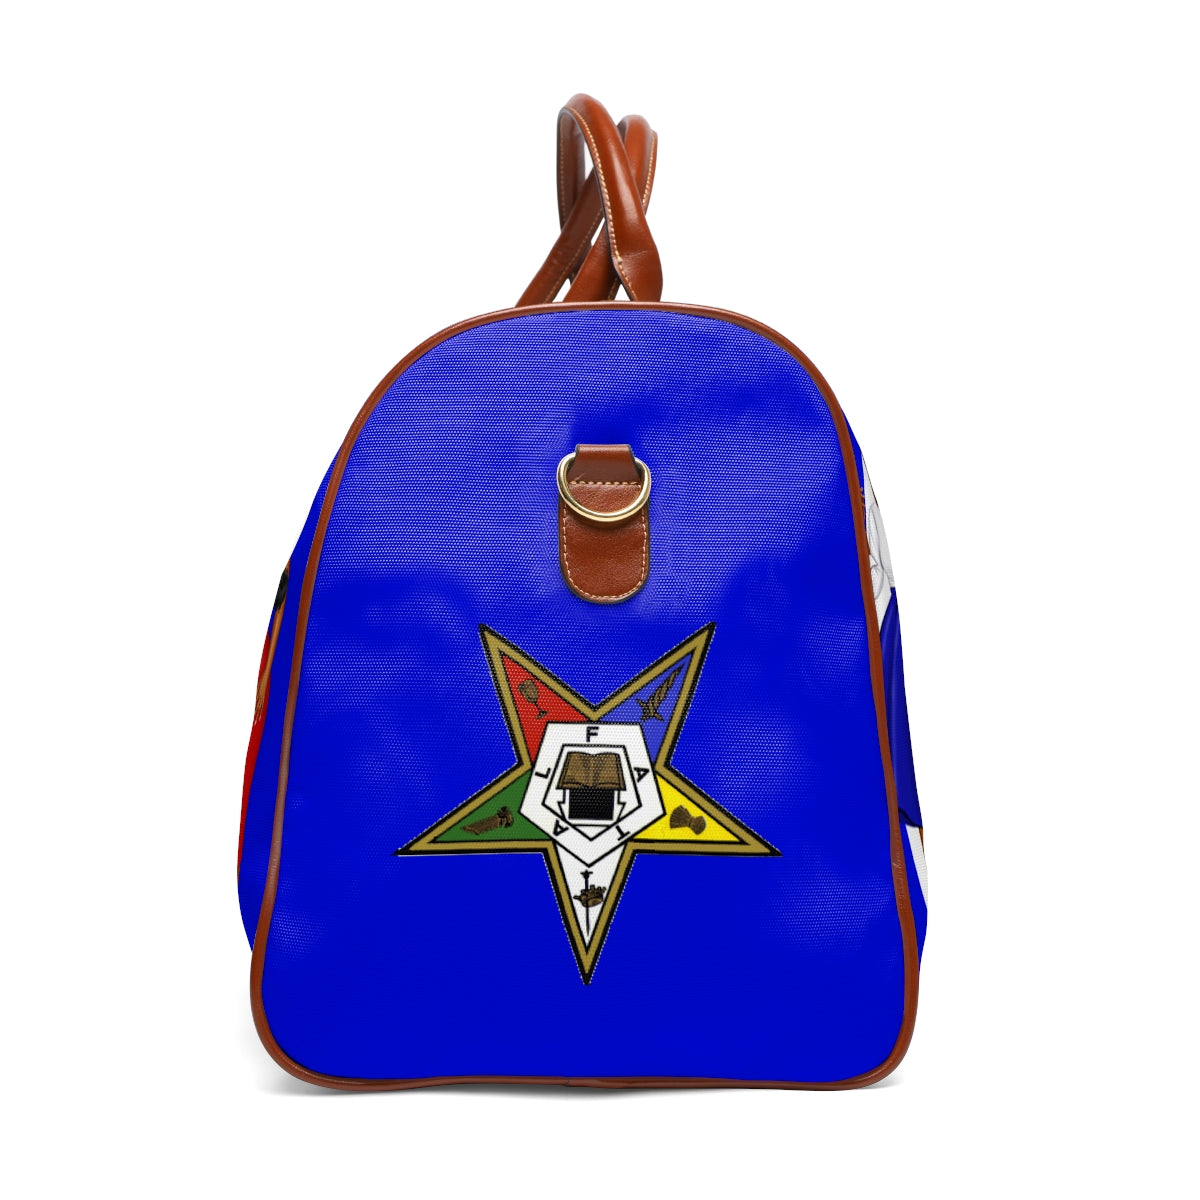 OES (FULL BLUE) TRAVEL BAGS